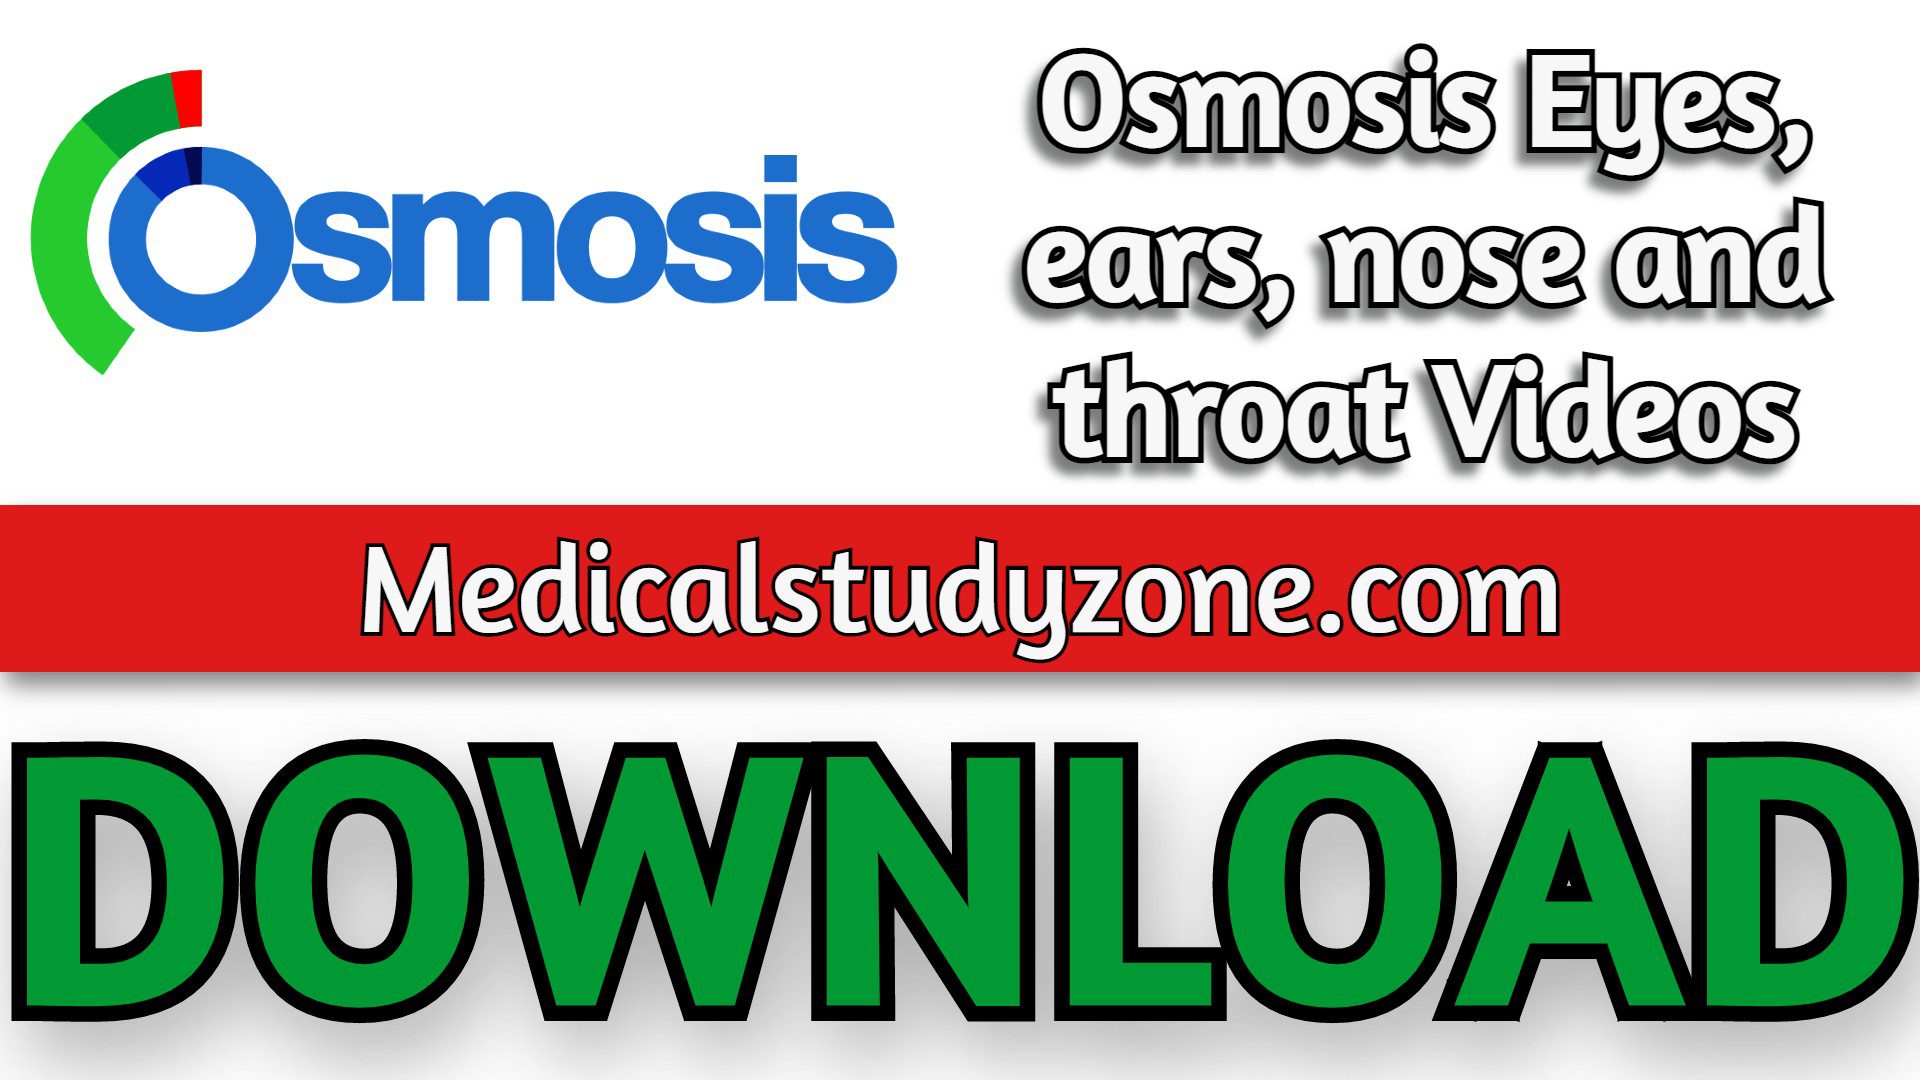 Osmosis Eyes, ears, nose and throat Videos 2023 Free Download